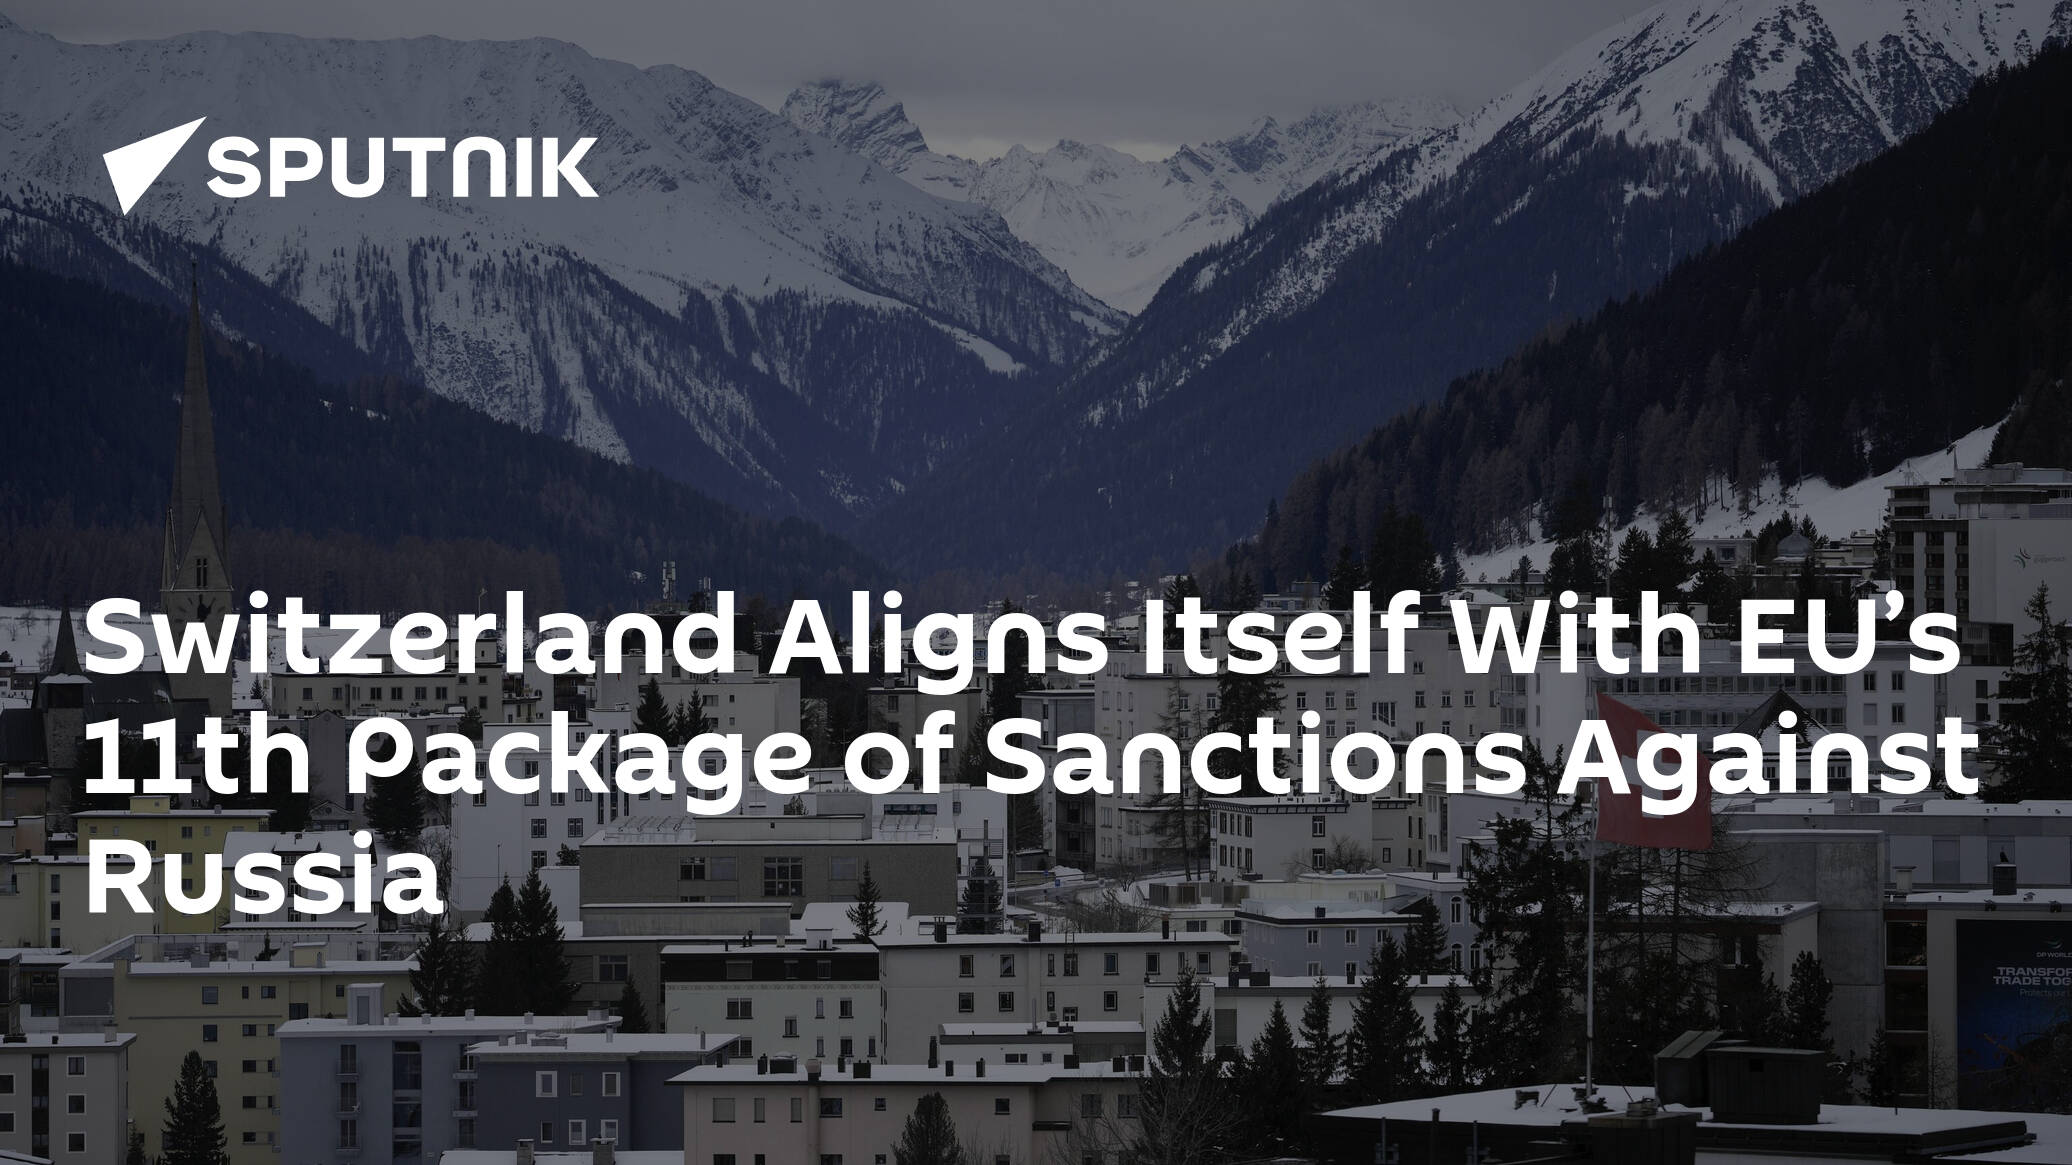 Switzerland Aligns Itself With EU’s 11th Package of Sanctions Against Russia